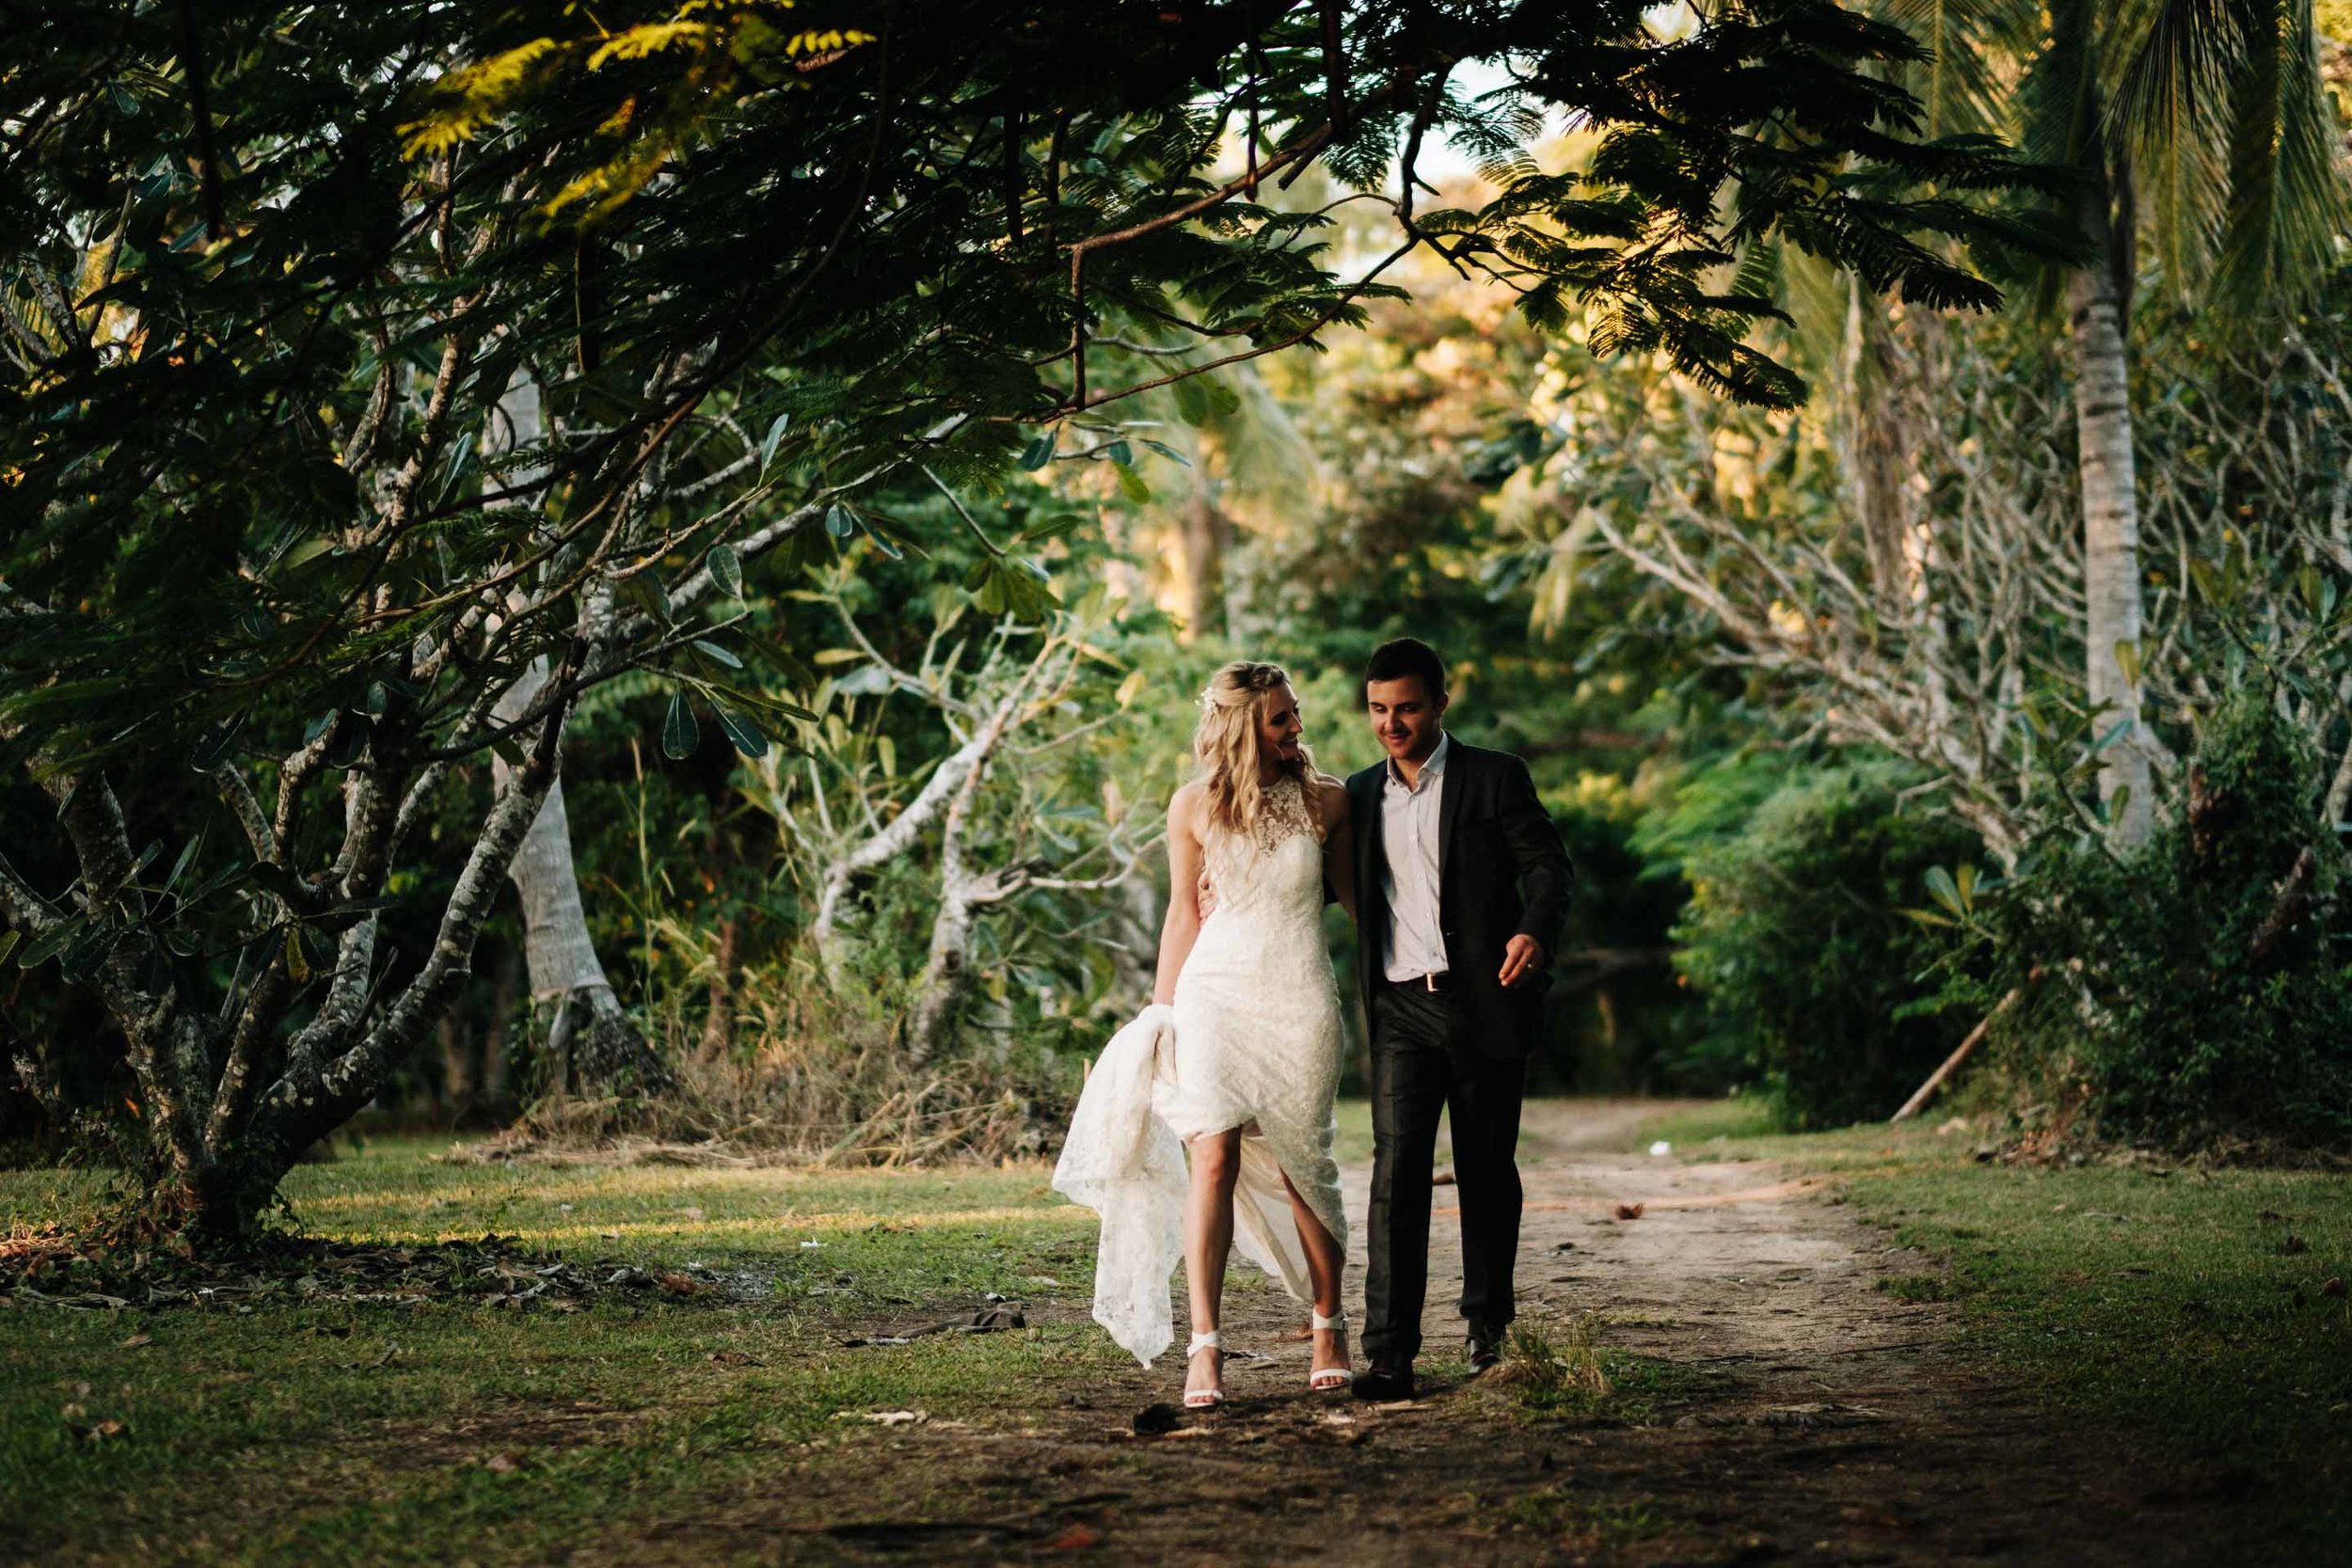 the bride and groom walking together hand in hand under trees on a sandy dirt road